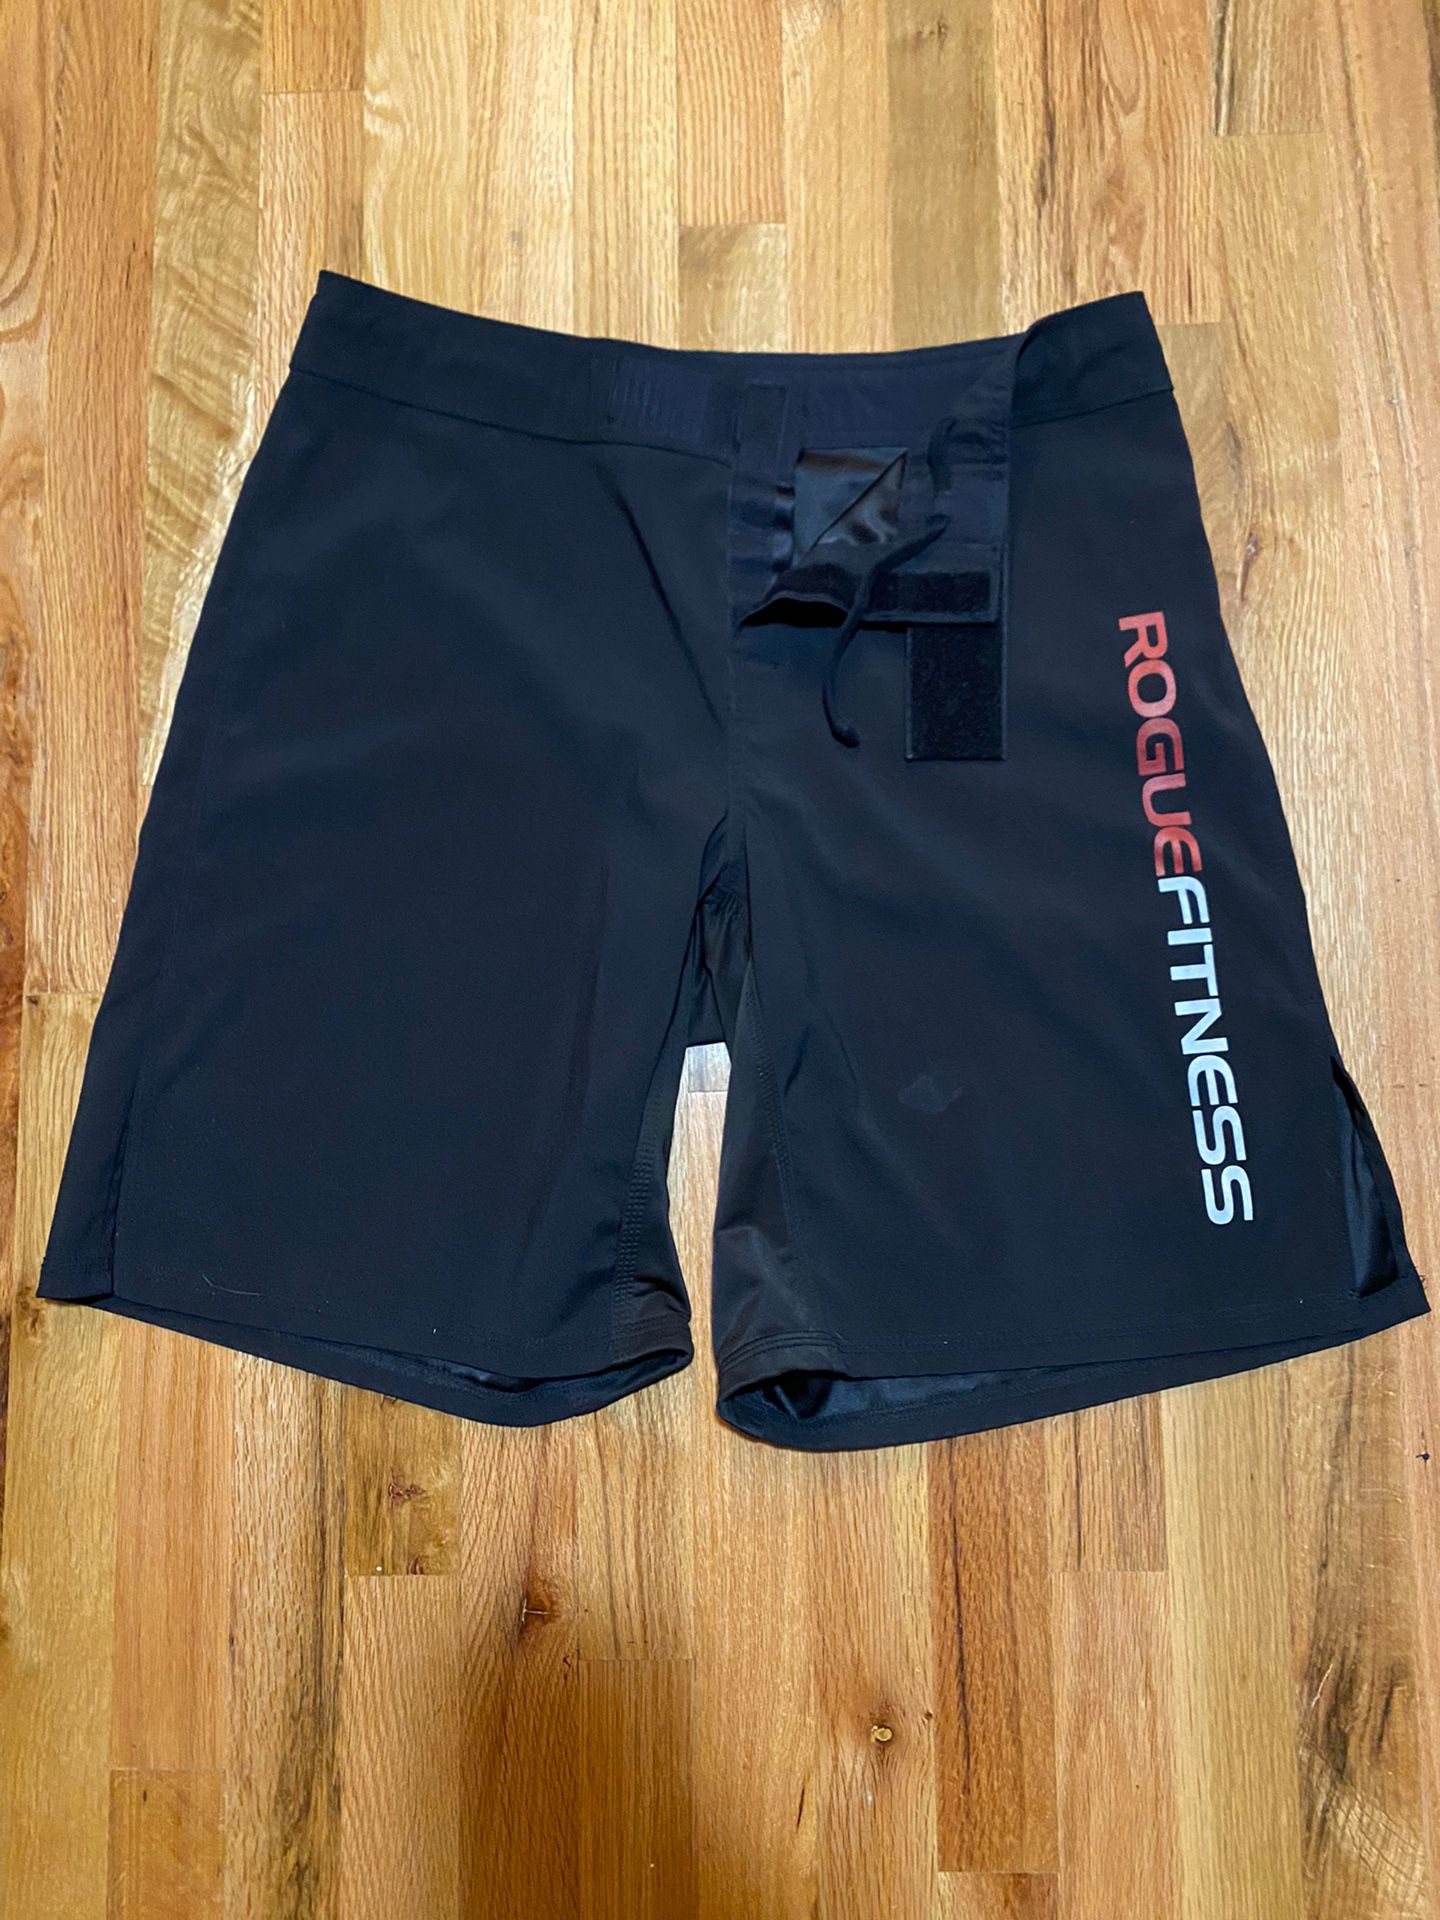 Rogue Fitness MMA/CrossFit Shorts (size 34)